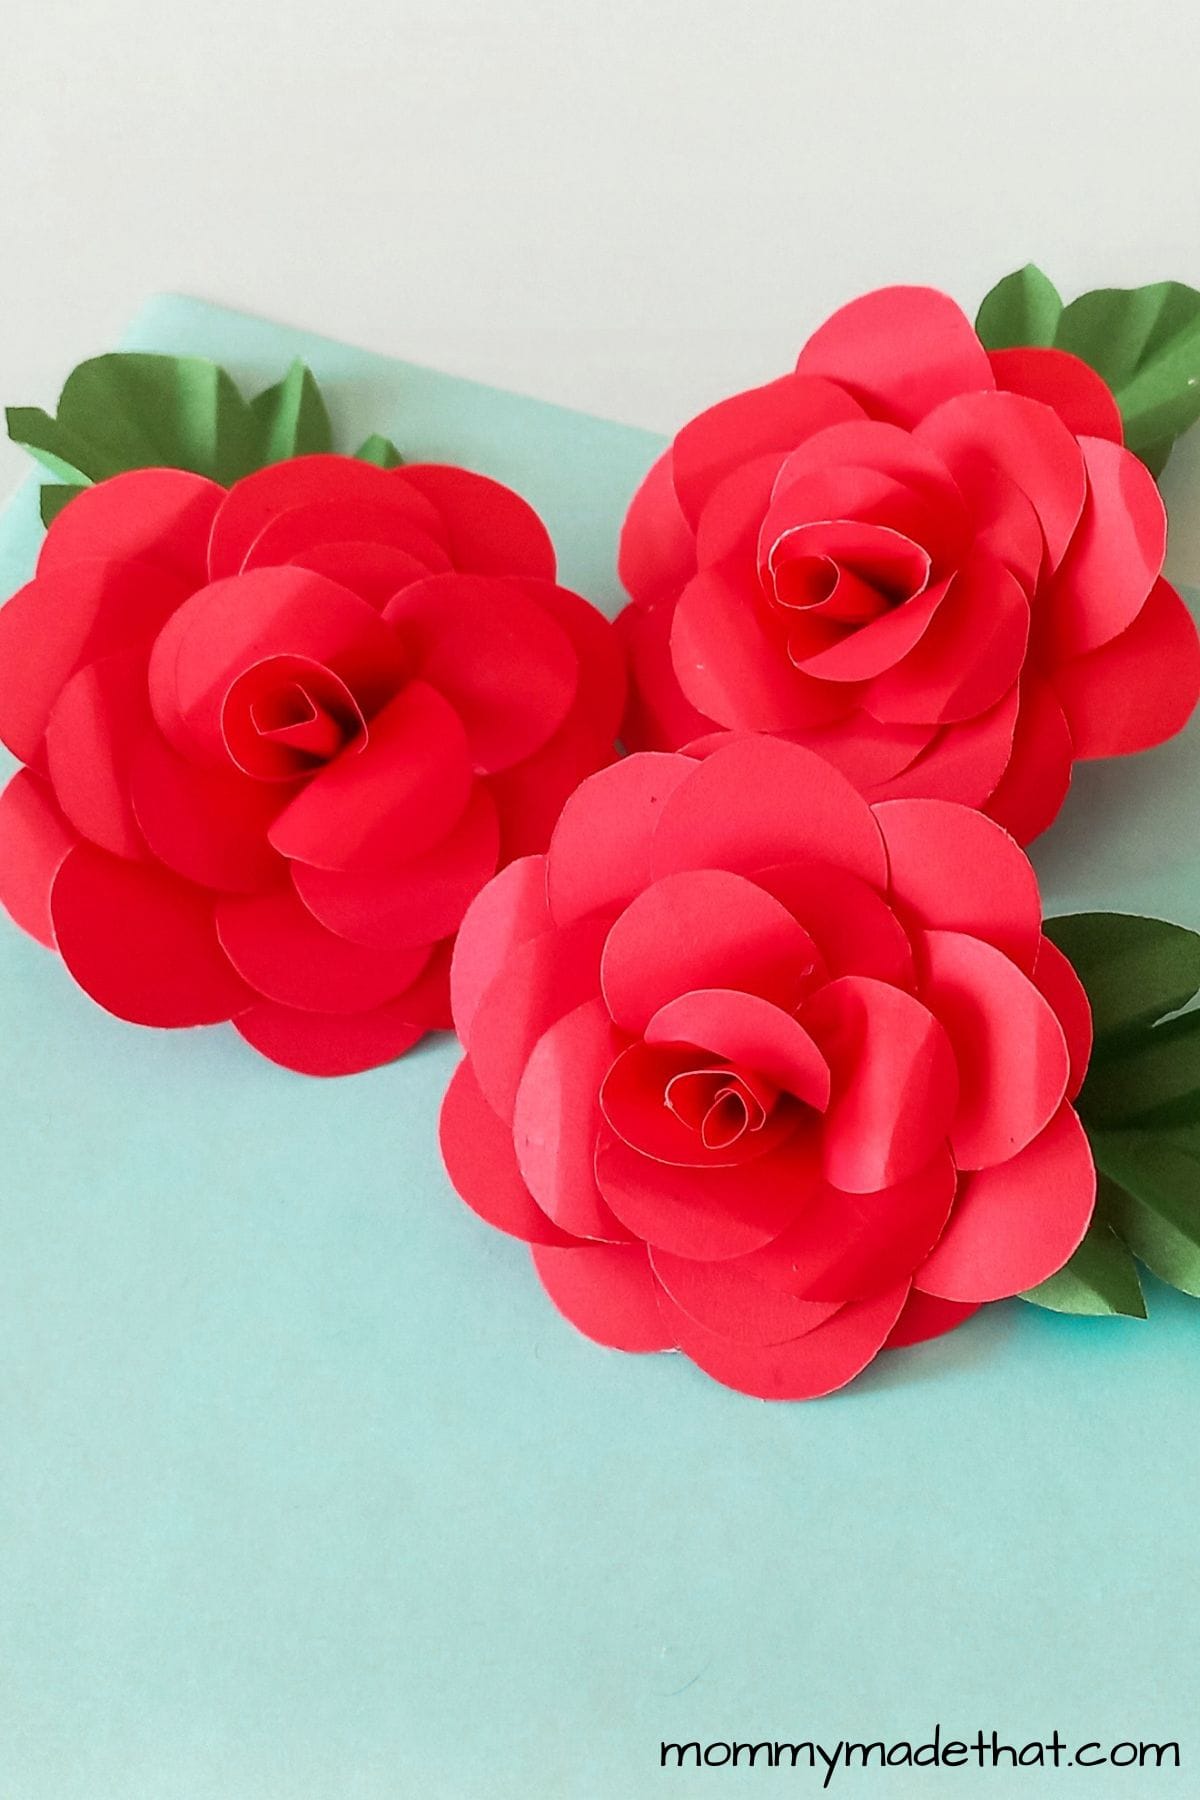 How to Make a Paper Rose (With Free Printable Template)